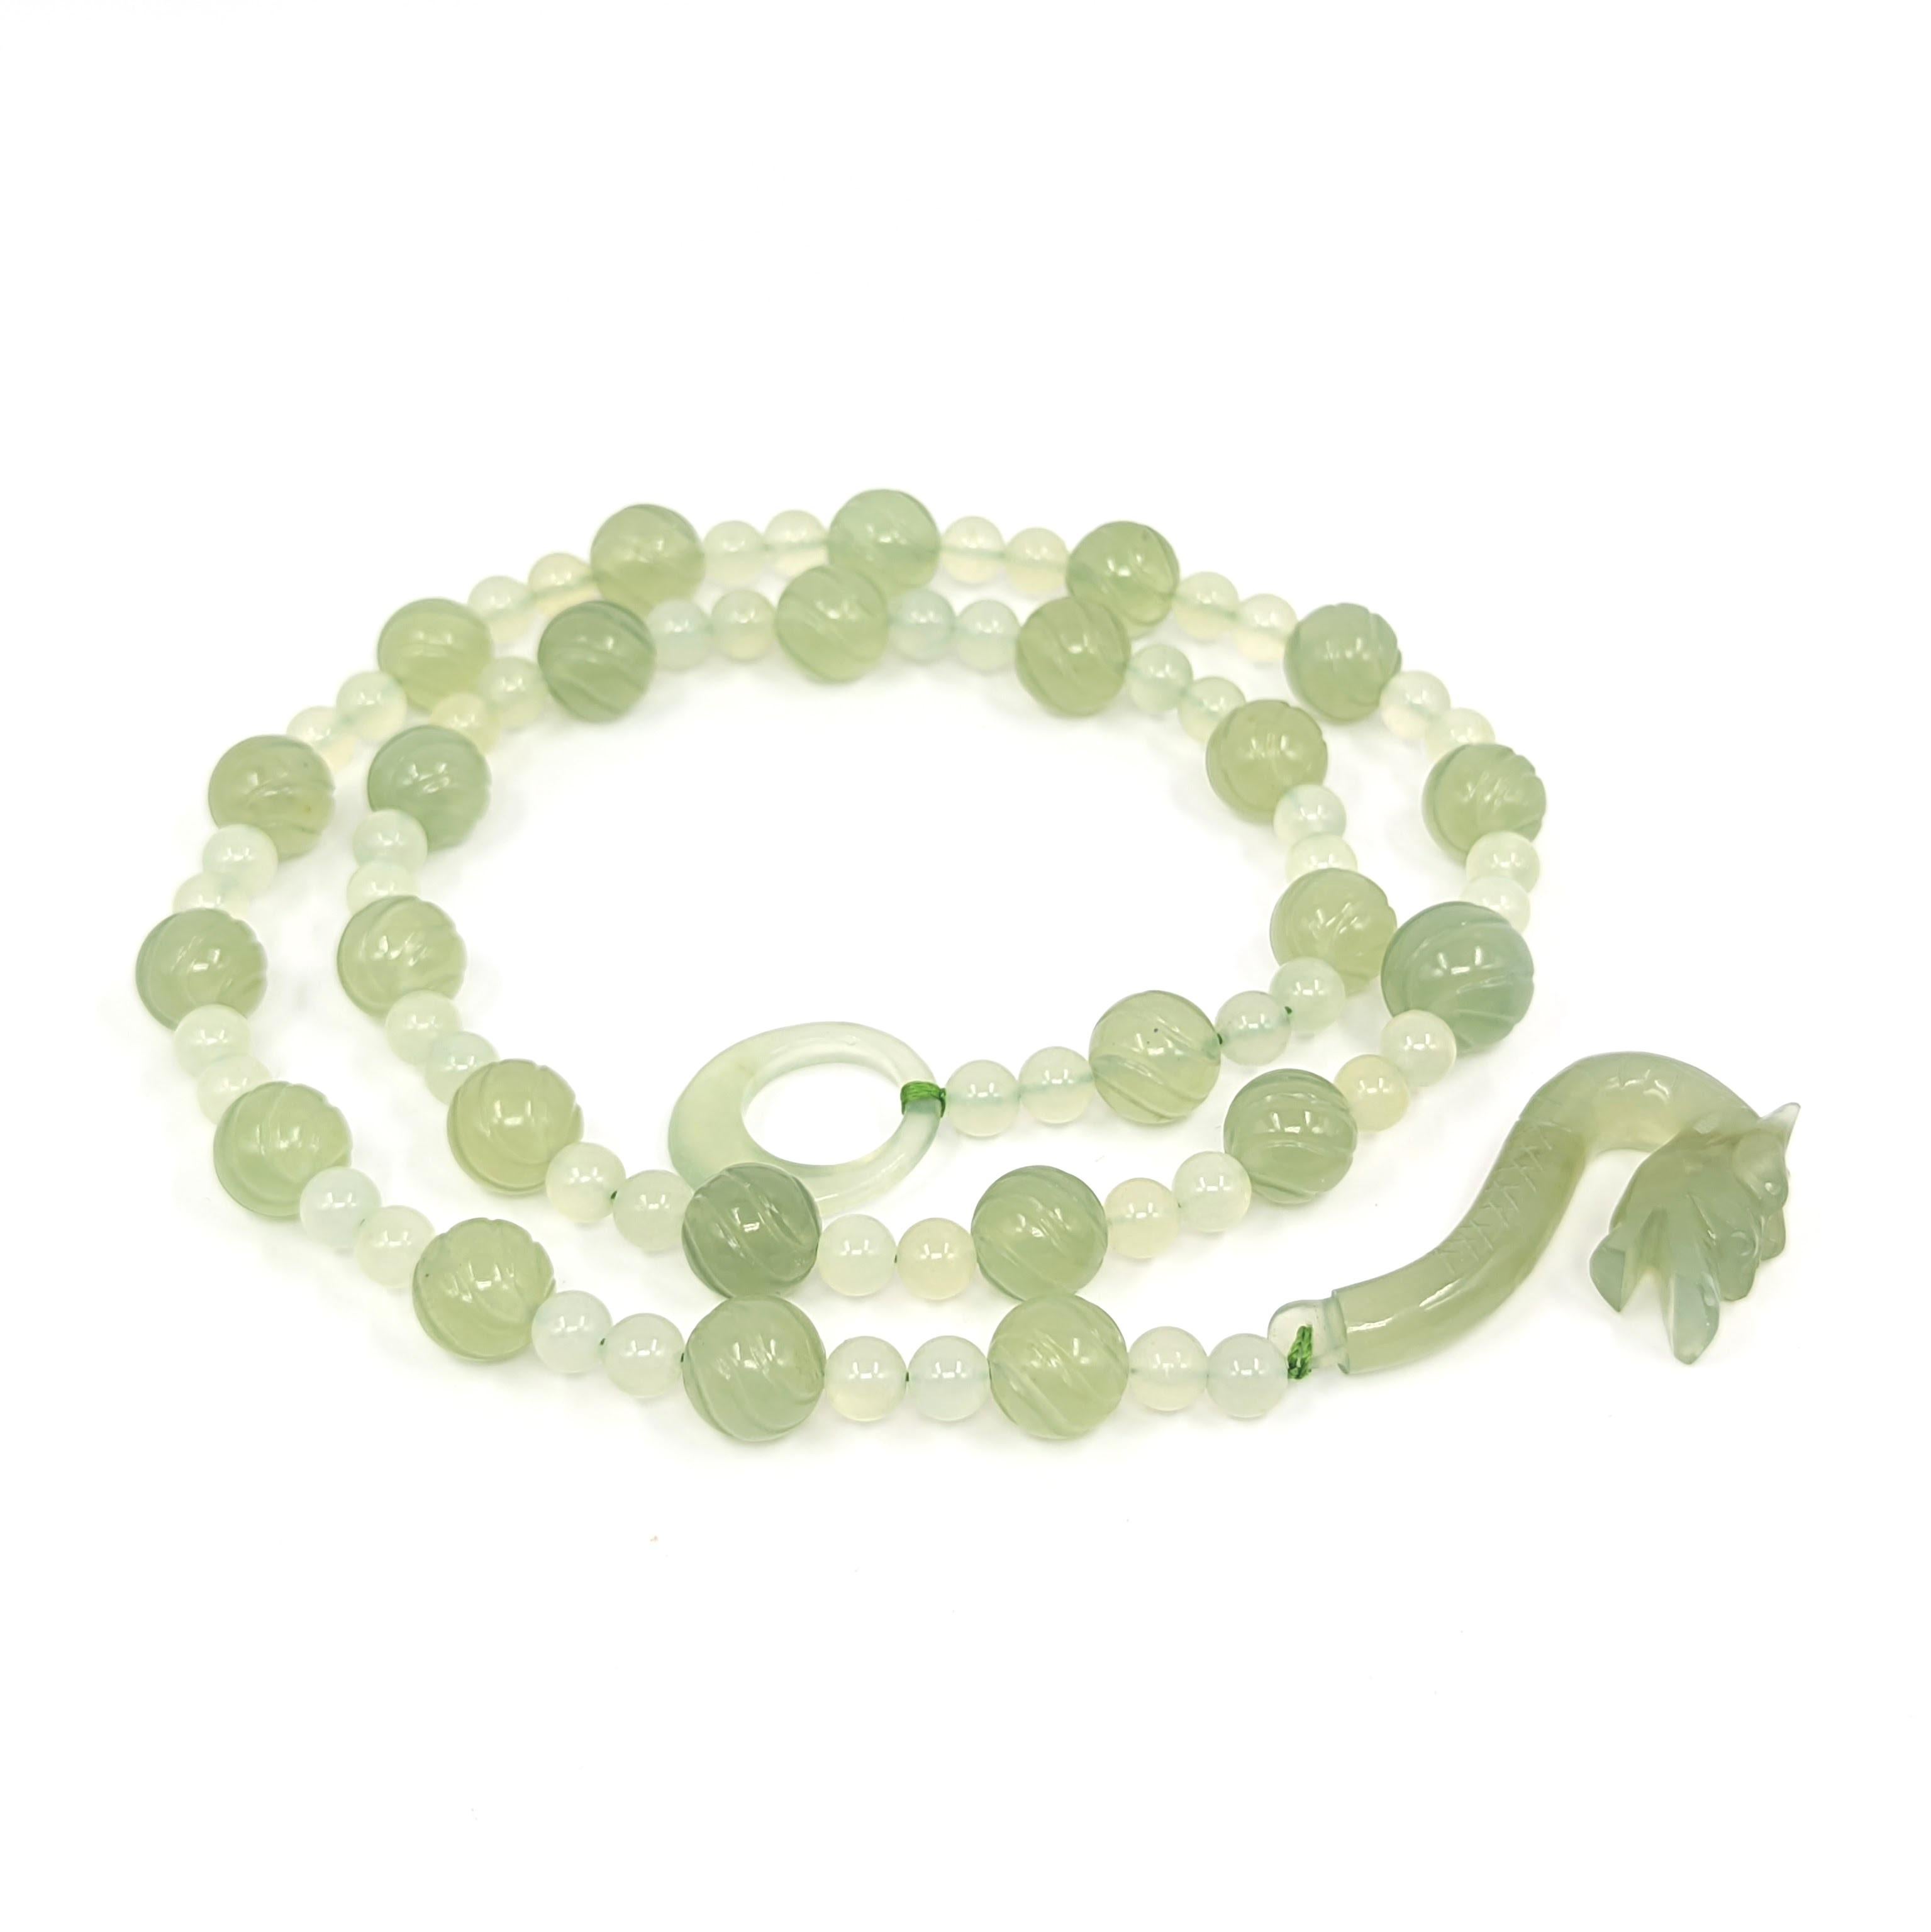 Women's or Men's Vintage Chinese Arts & Crafts 'HK' Ltd Translucent Two Tone Jade Dragon Necklace